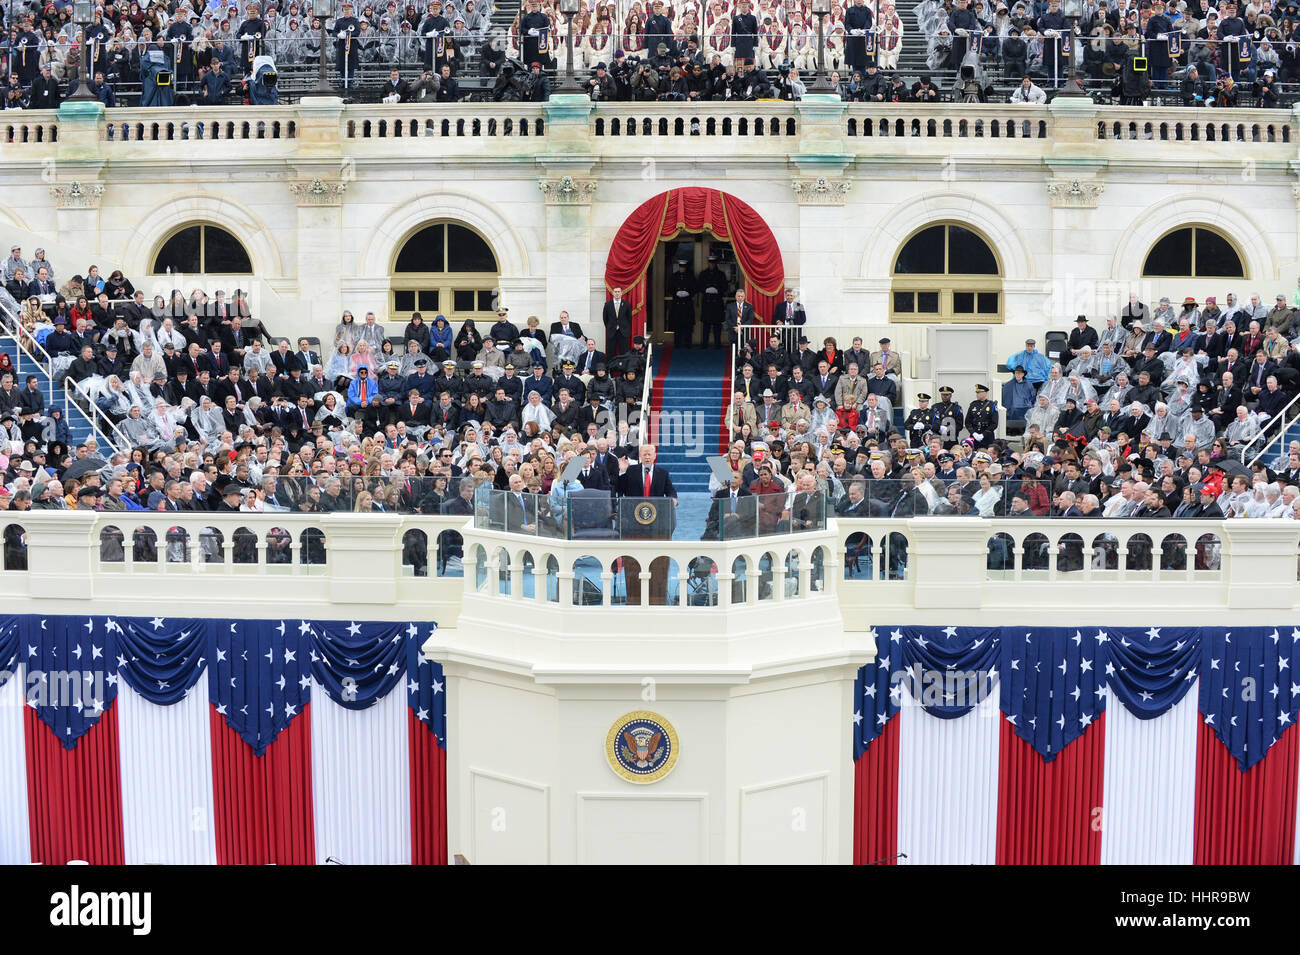 Washington DC, USA. 20th Jan, 2017. President Donald Trump delivers the address at his inauguration on January 20, 2017 in Washington, DC Trump became the 45th President of the United States. Credit: MediaPunch Inc/Alamy Live News Stock Photo